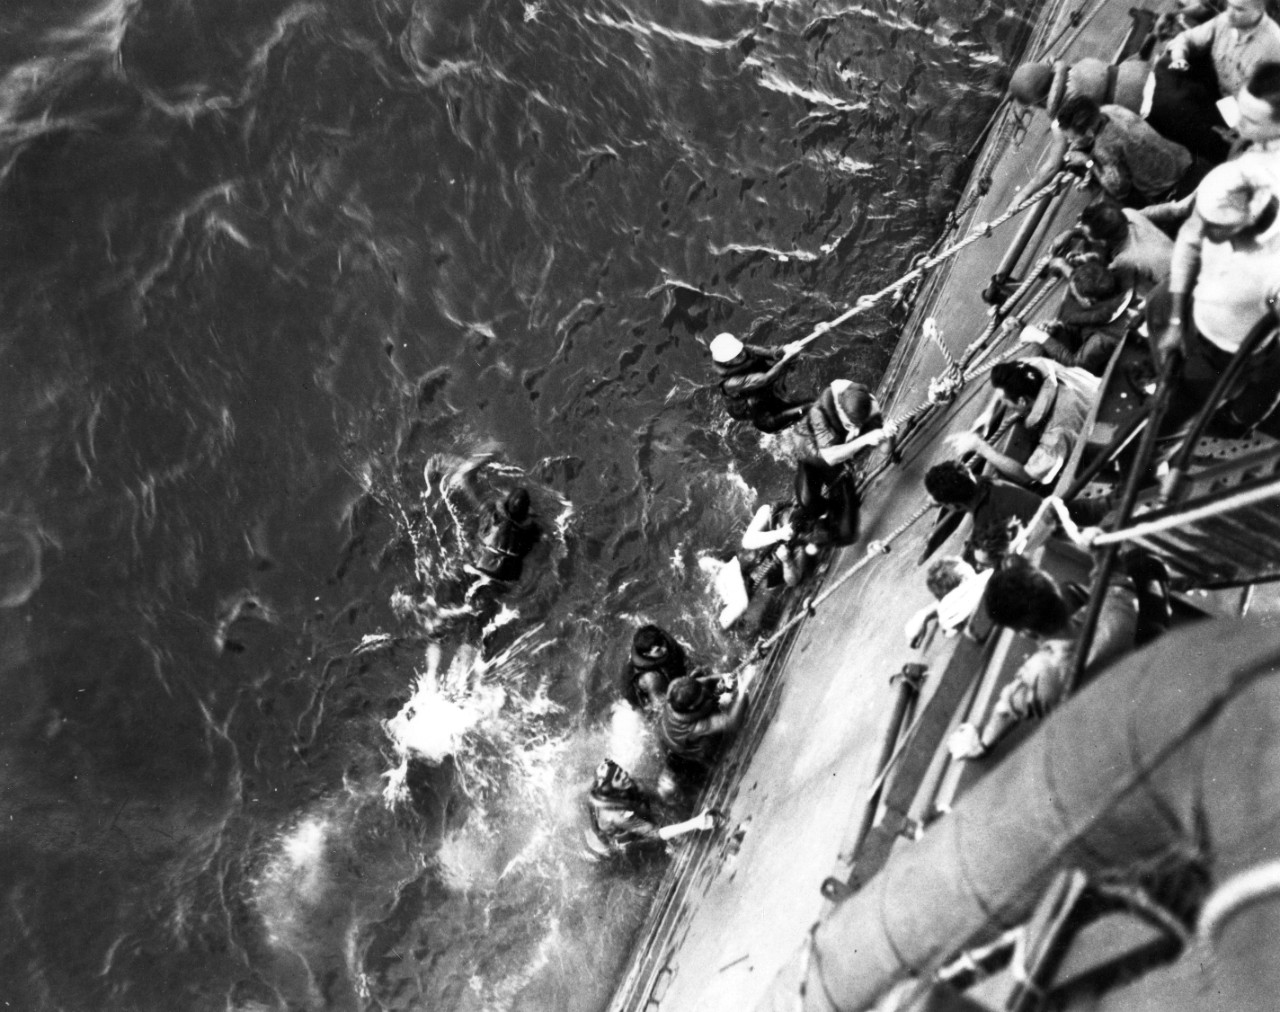 Photo #: 80-G-7392  Battle of the Coral Sea, May 1942